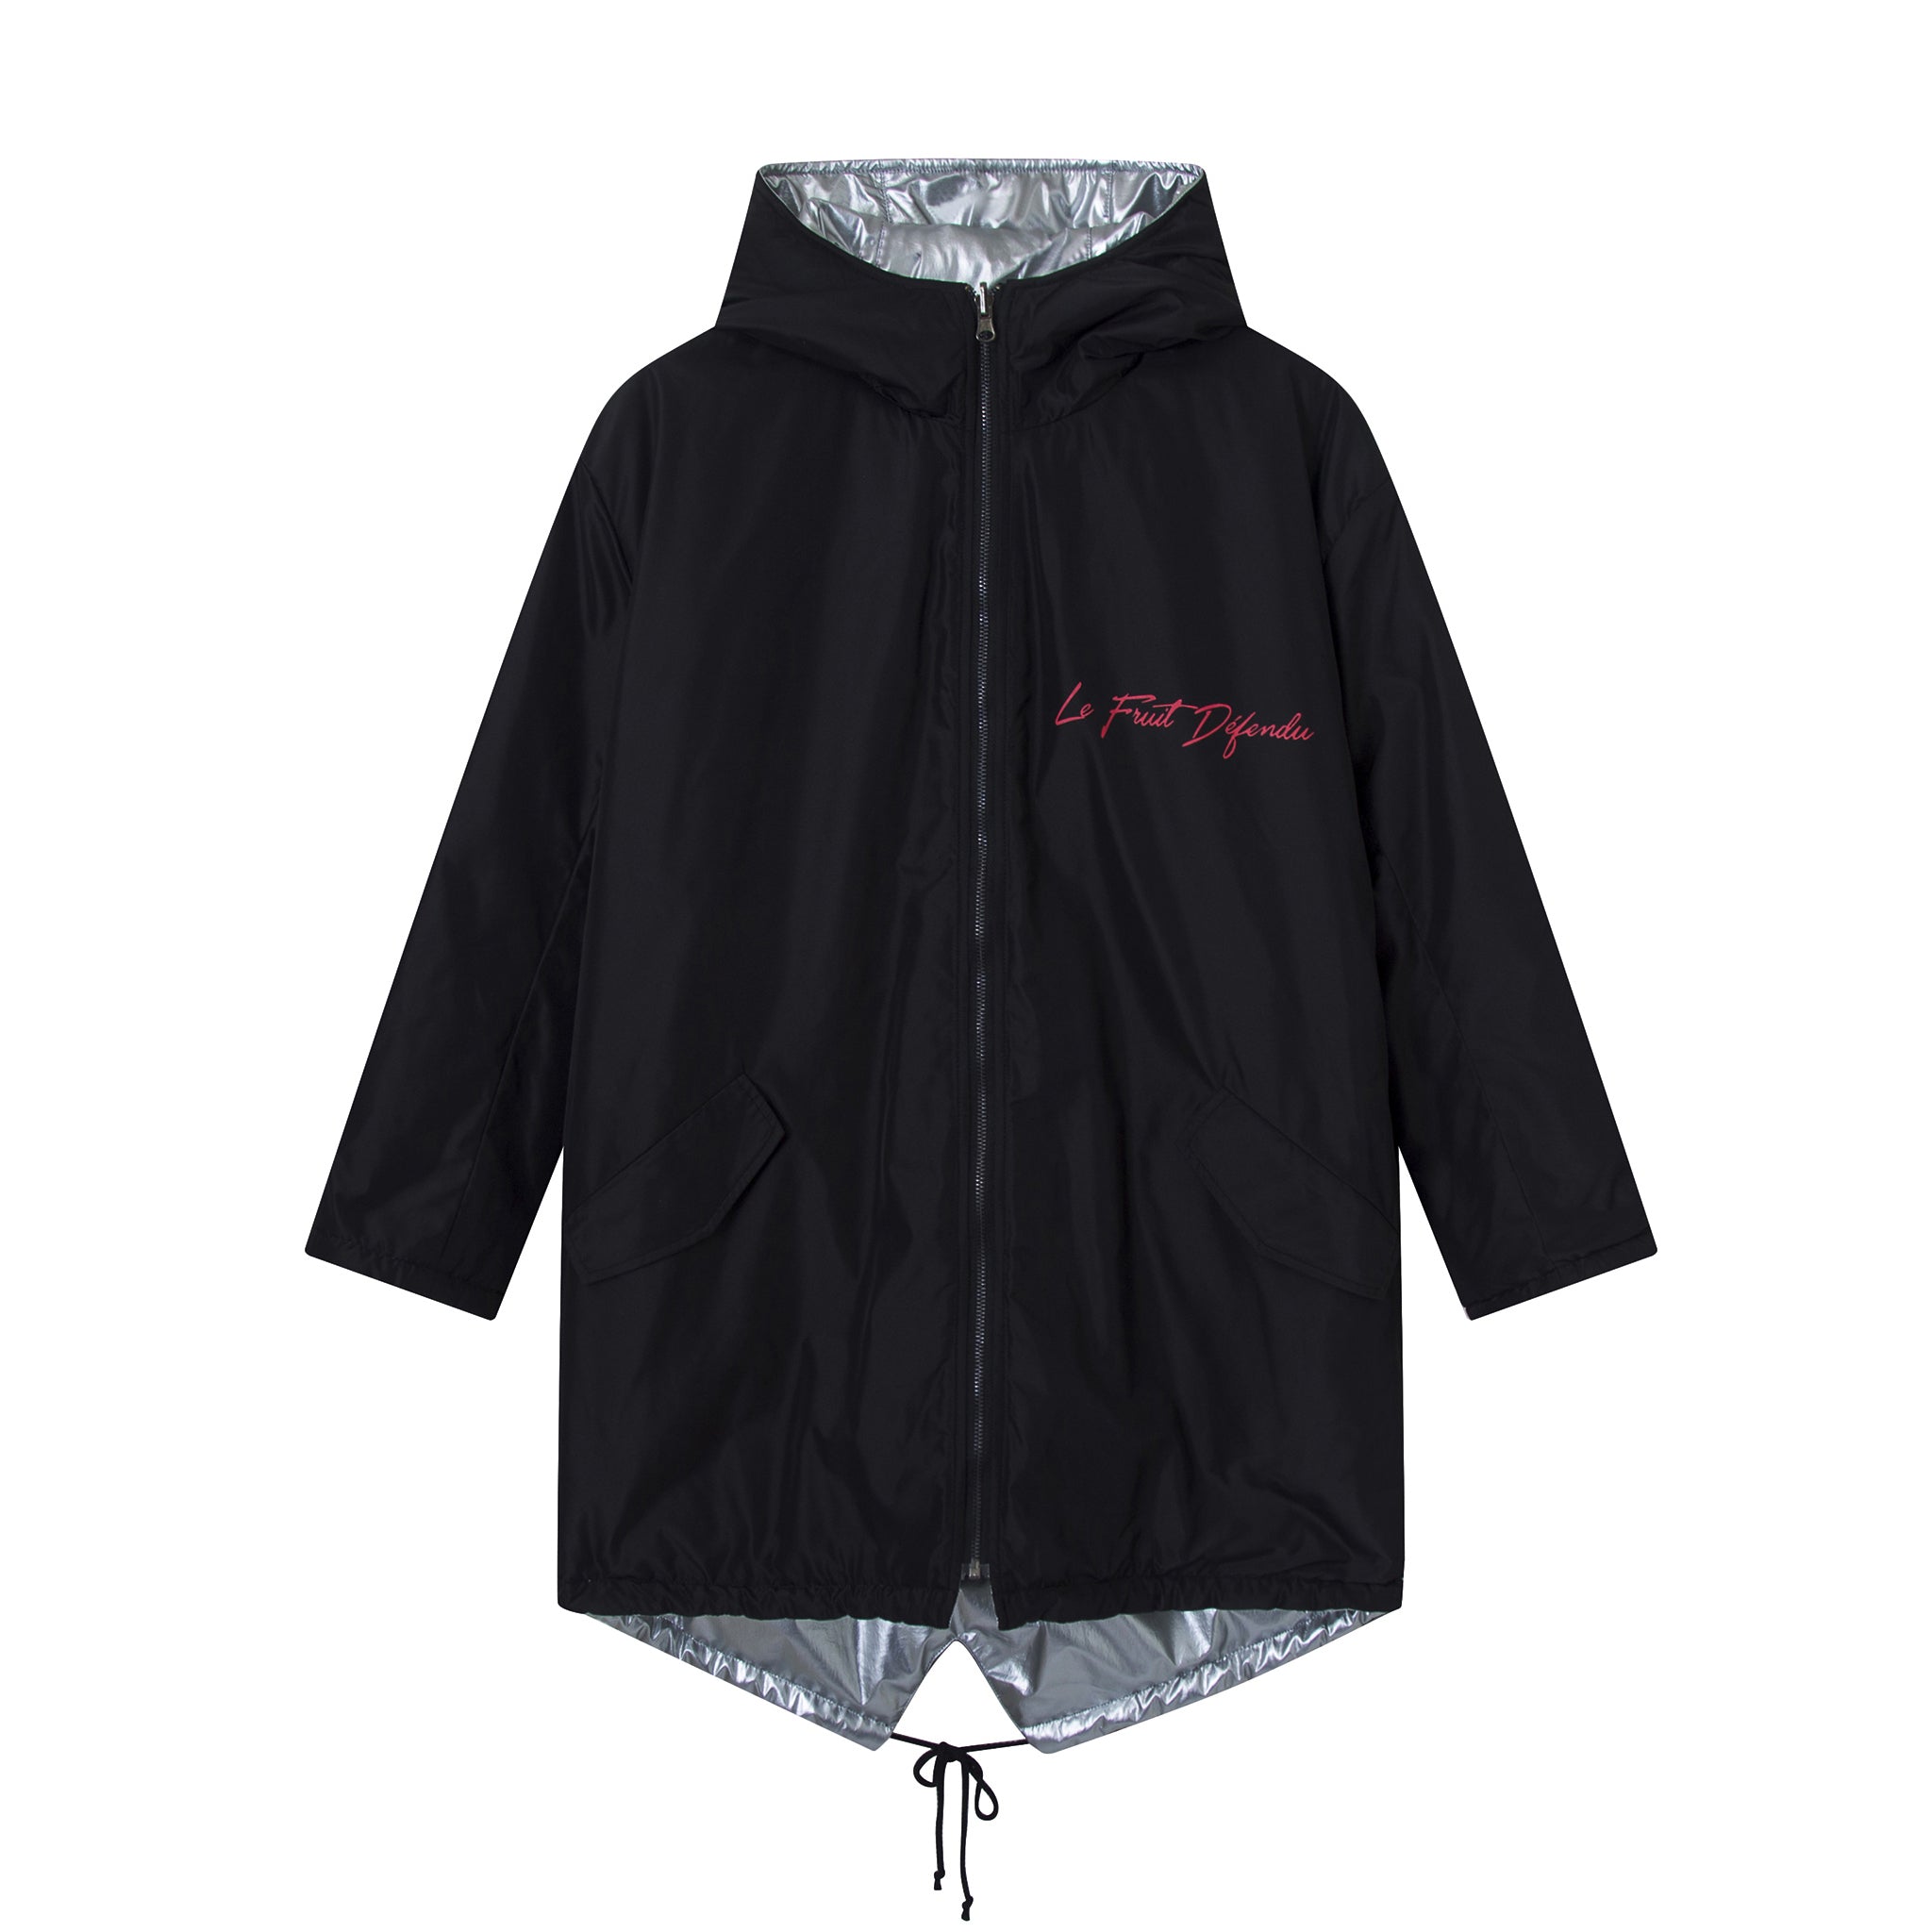 Load image into Gallery viewer, Vision Dreamer Reversible Rain Coat